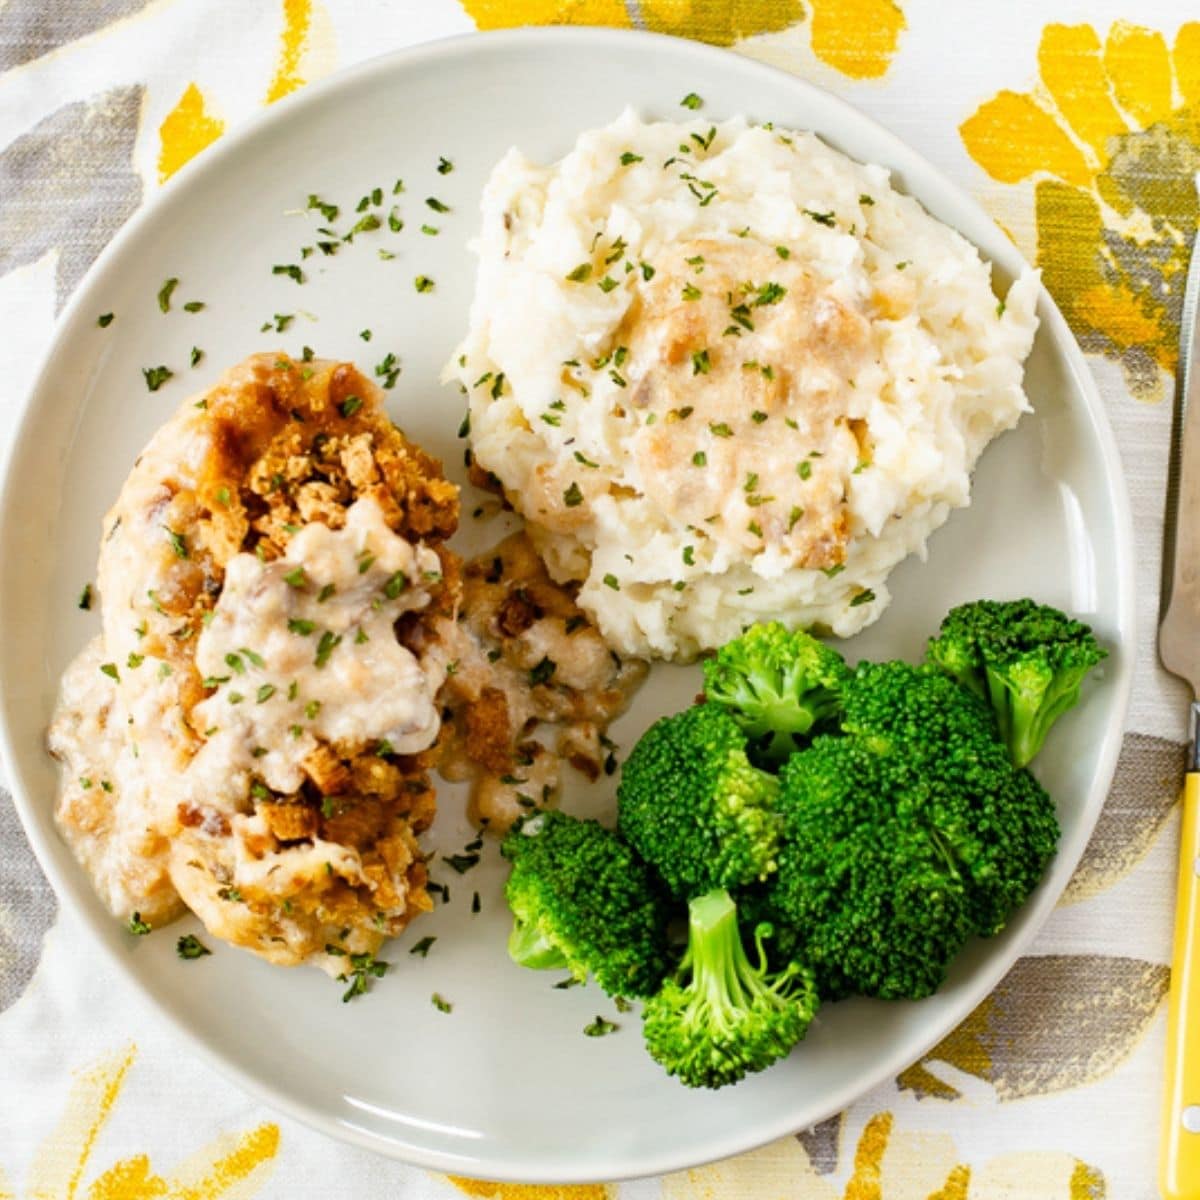 Swiss chicken served with potatoes and broccoli on a dinner plate.